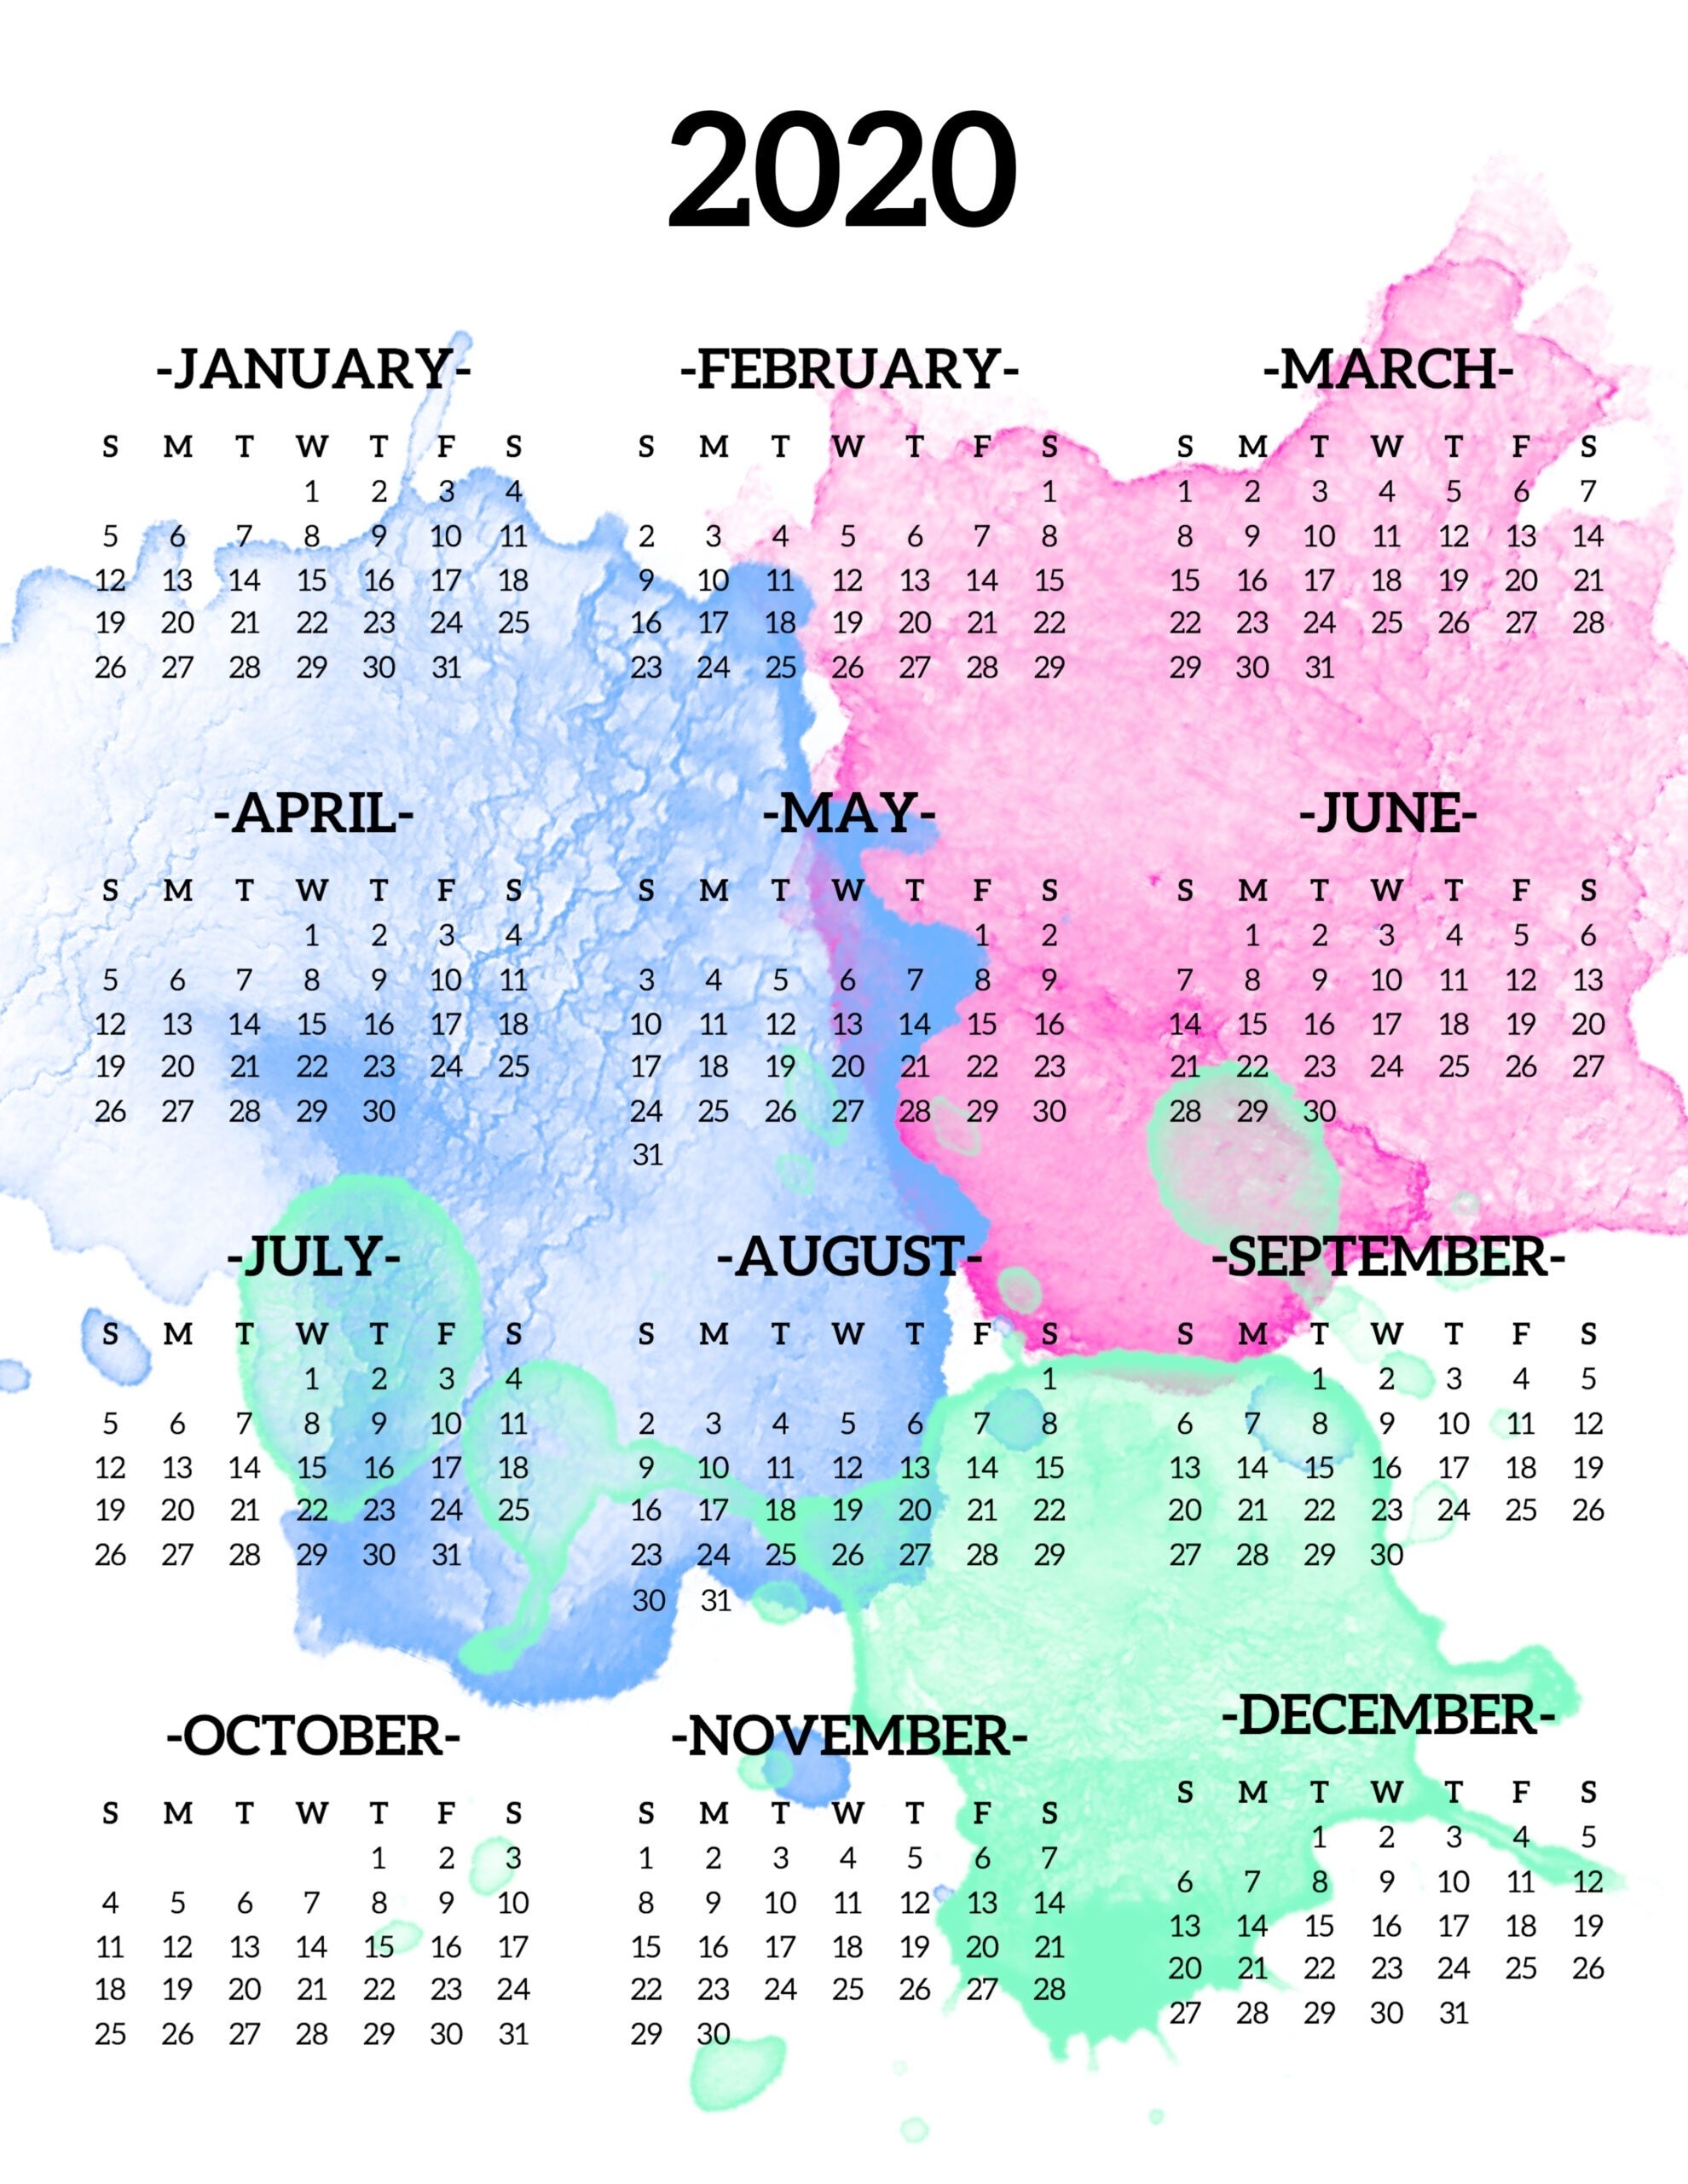 Calendar 2020 Printable One Page - Paper Trail Design inside Year At A Glance Calendar 2020 Free Printable